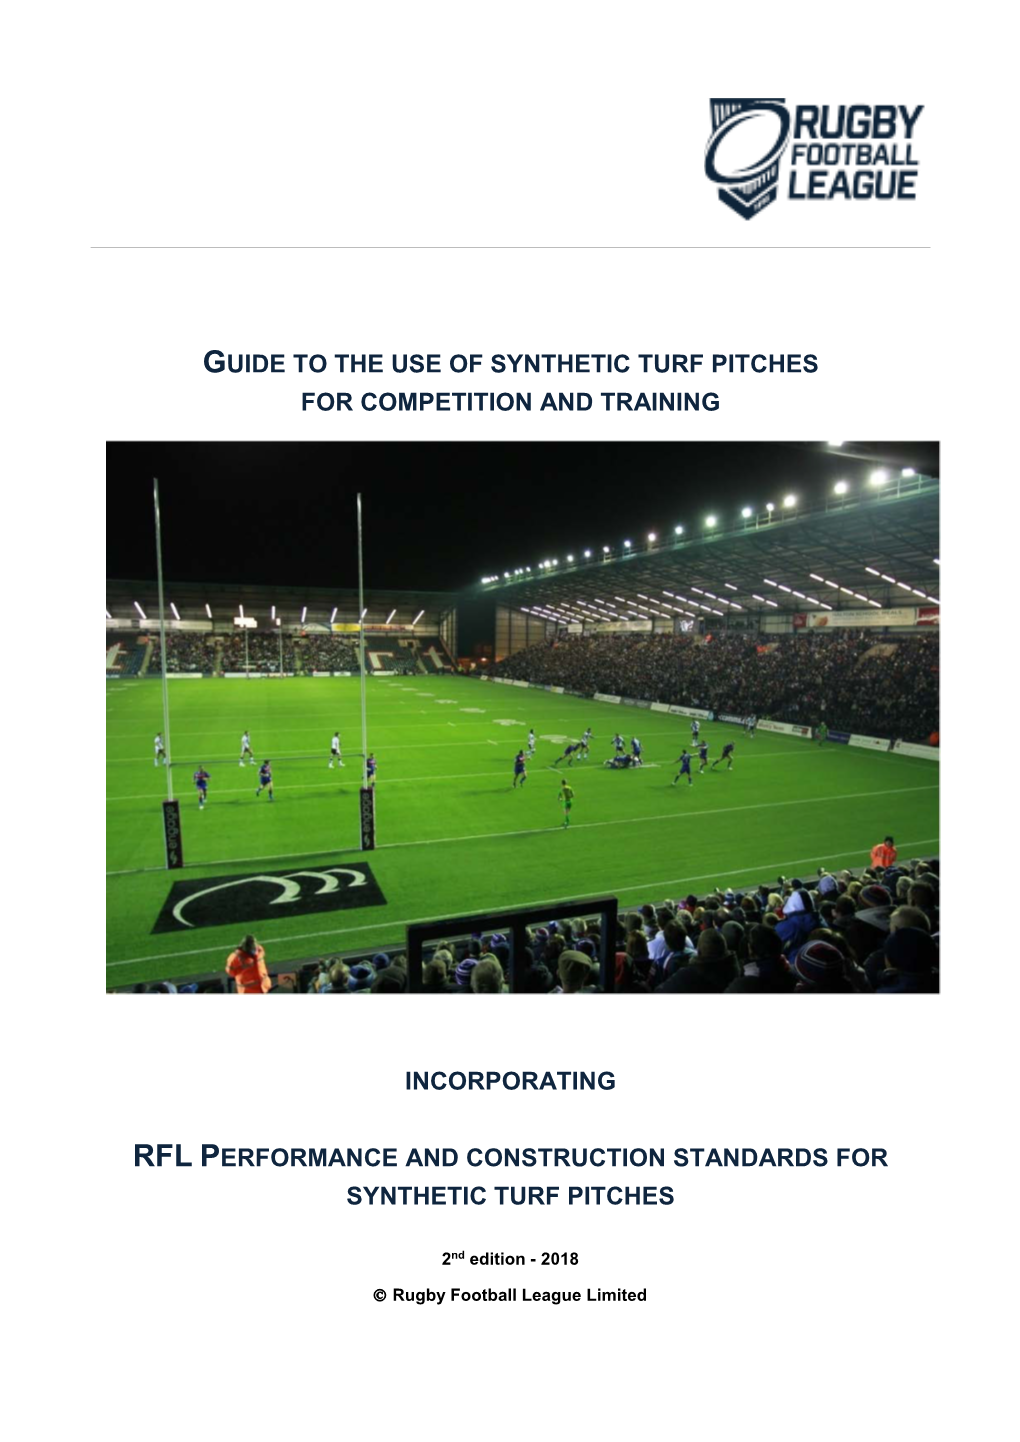 Guide to the Use of Synthetic Turf Pitches for Competition and Training